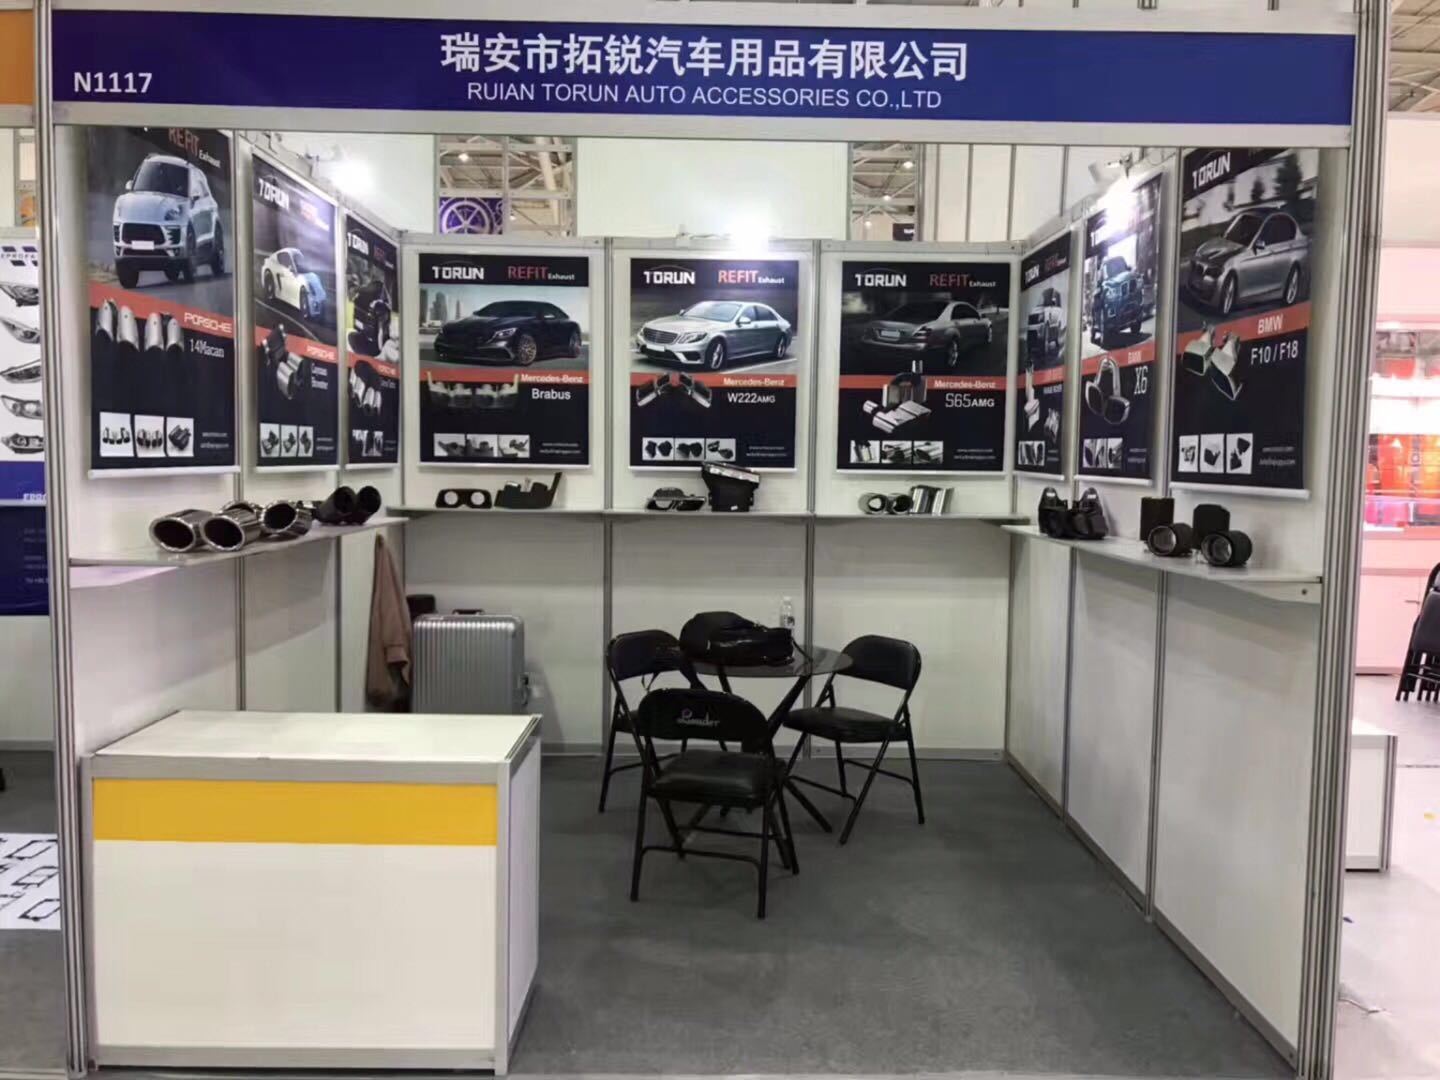 2018 AMPA TAIPEI from 11 Apr. to 14 Apr in Nangang Exhibition Center